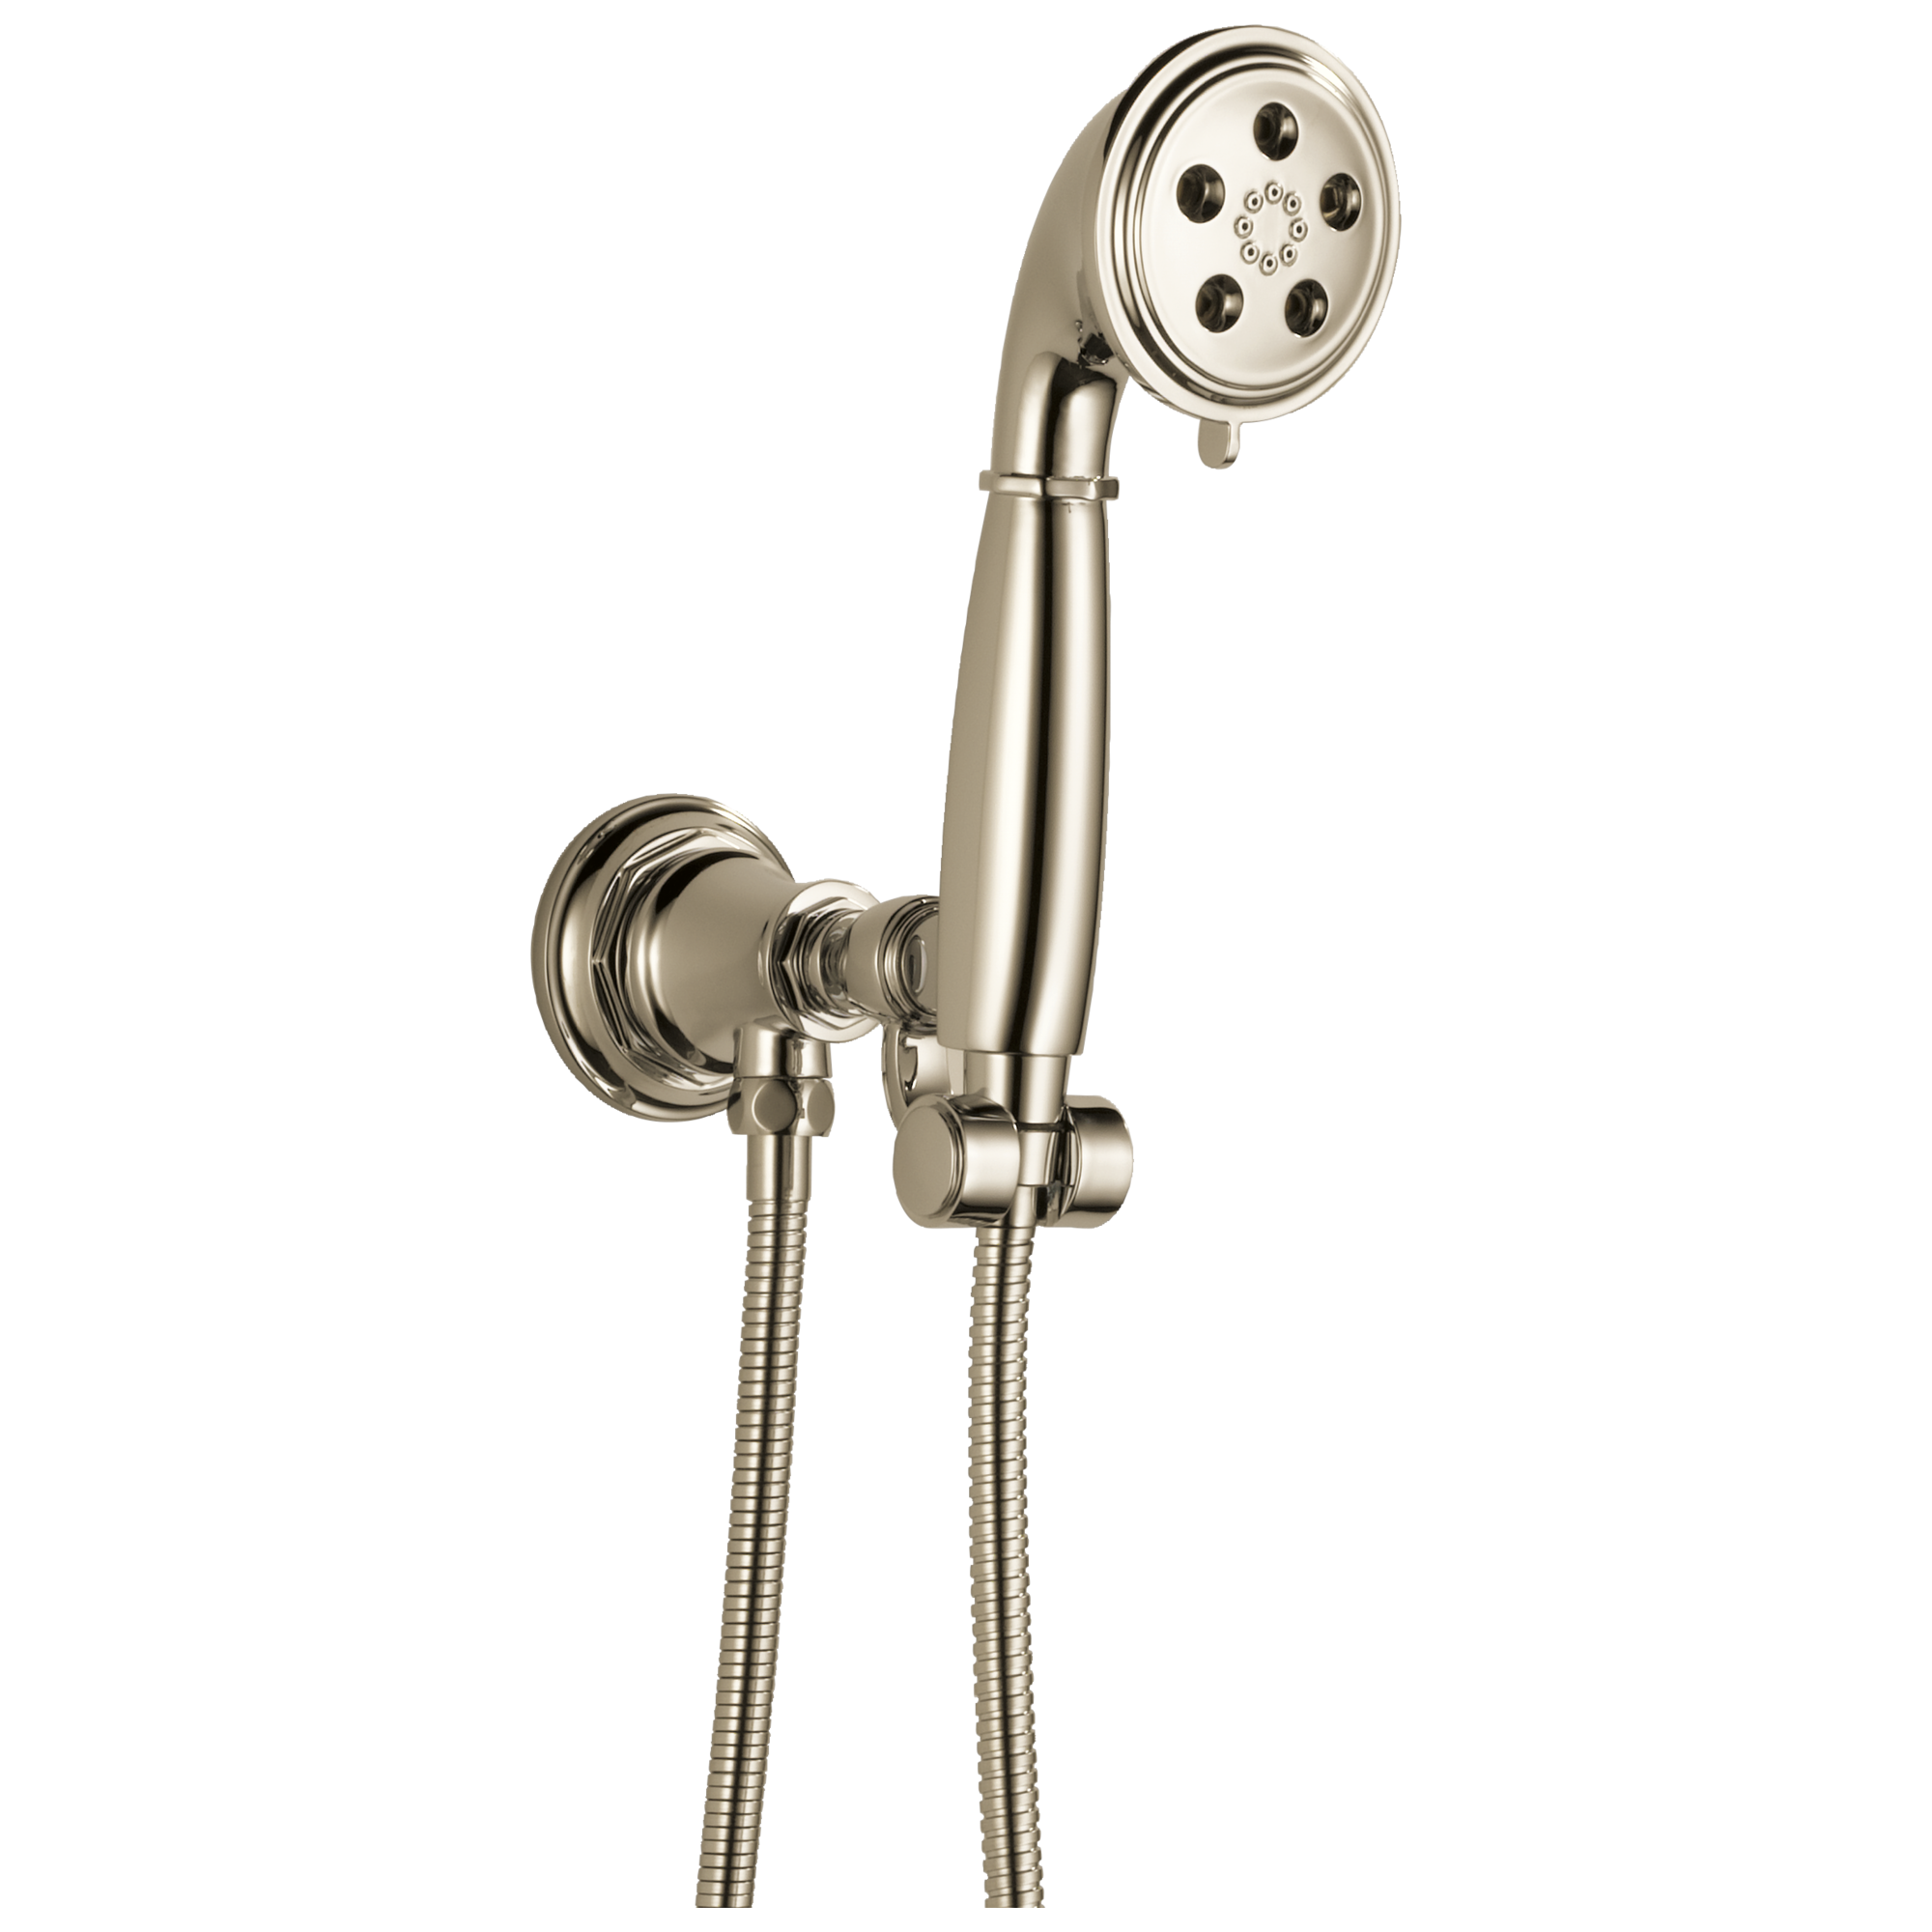 Brizo Rook Wall Mount Handshower with H2OKinectic Technology